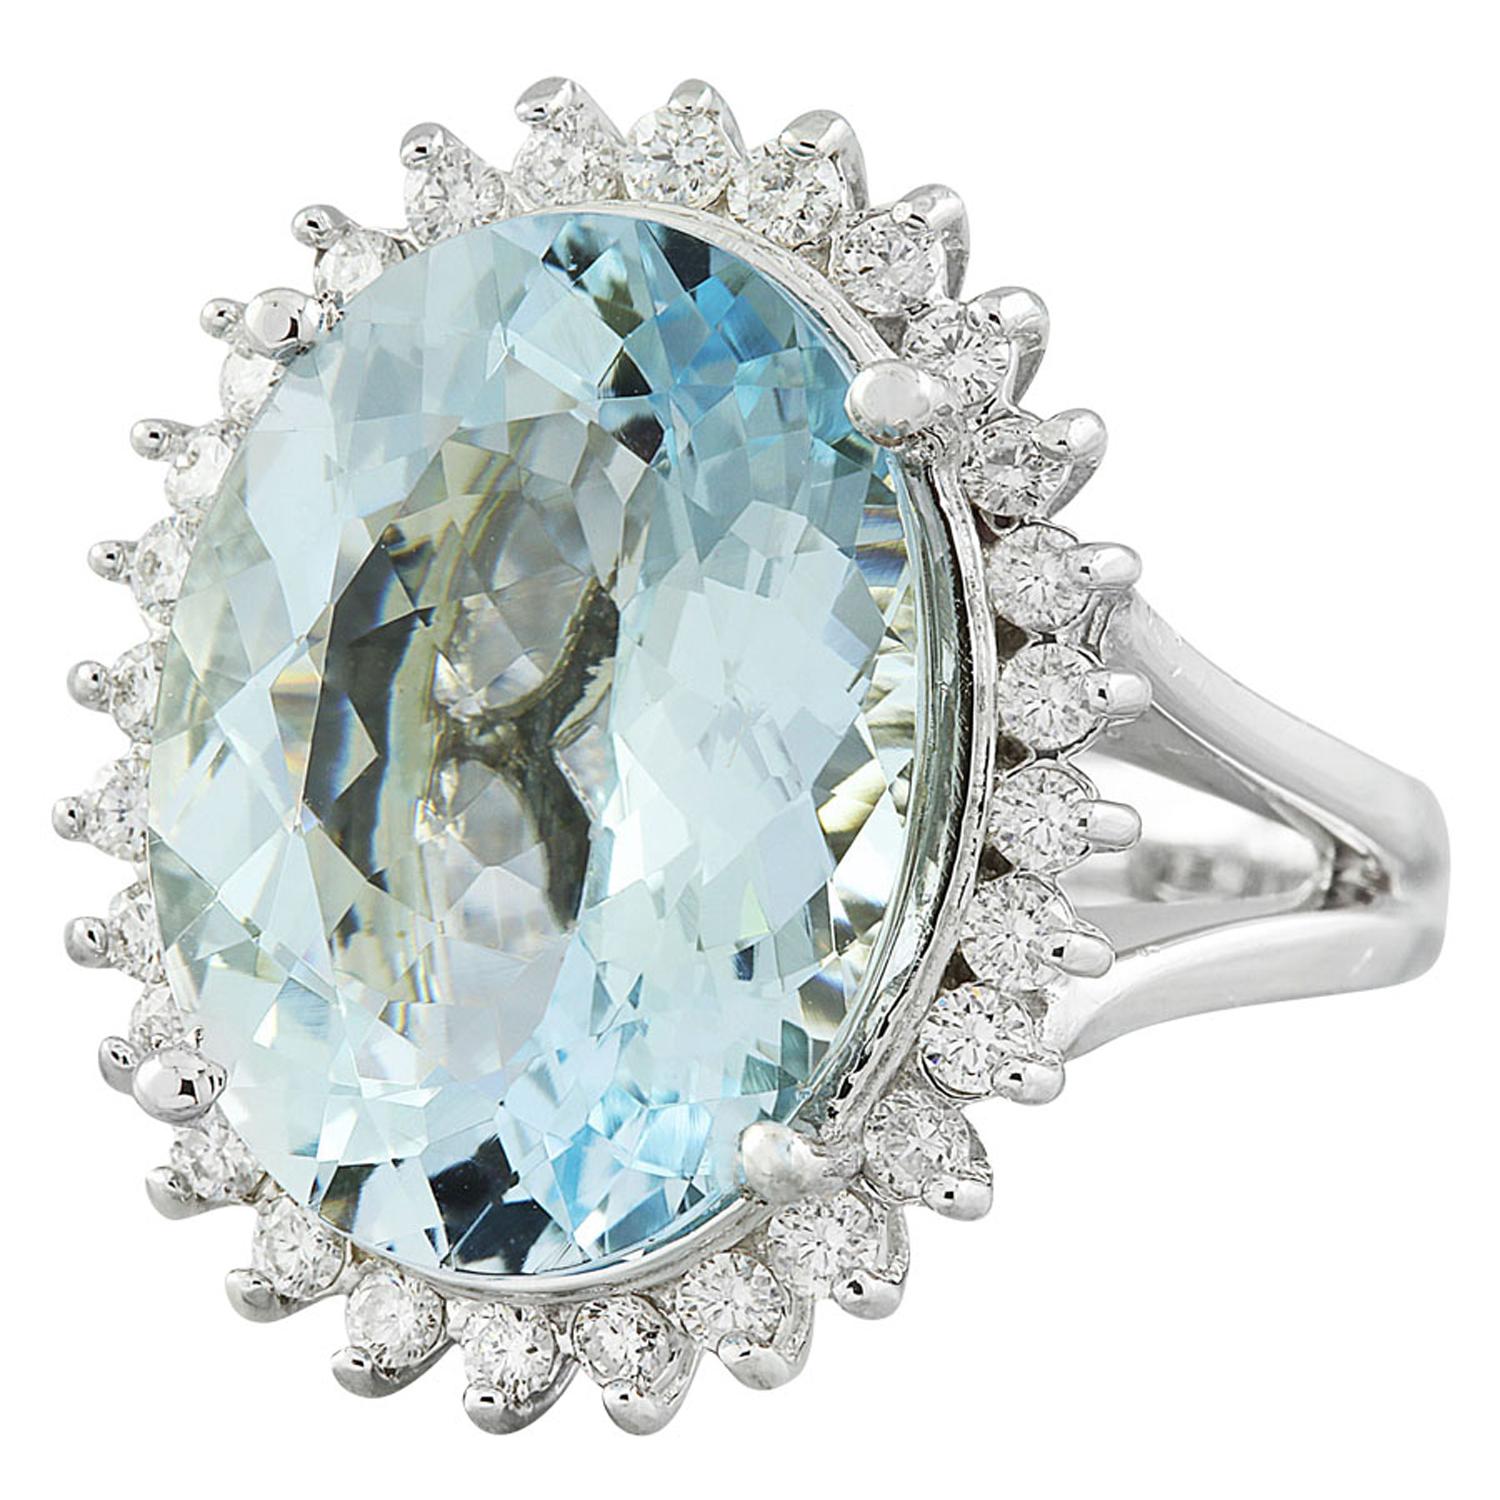 13.16 Carat Natural Aquamarine 14 Karat Solid White Gold Diamond Ring
Stamped: 14K 
Total Ring Weight: 12.8 Grams 
Aquamarine Weight 12.44 Carat (18.00x13.00 Millimeters)
Diamond Weight: 0.72 carat (F-G Color, VS2-SI1 Clarity)
Face Measures: